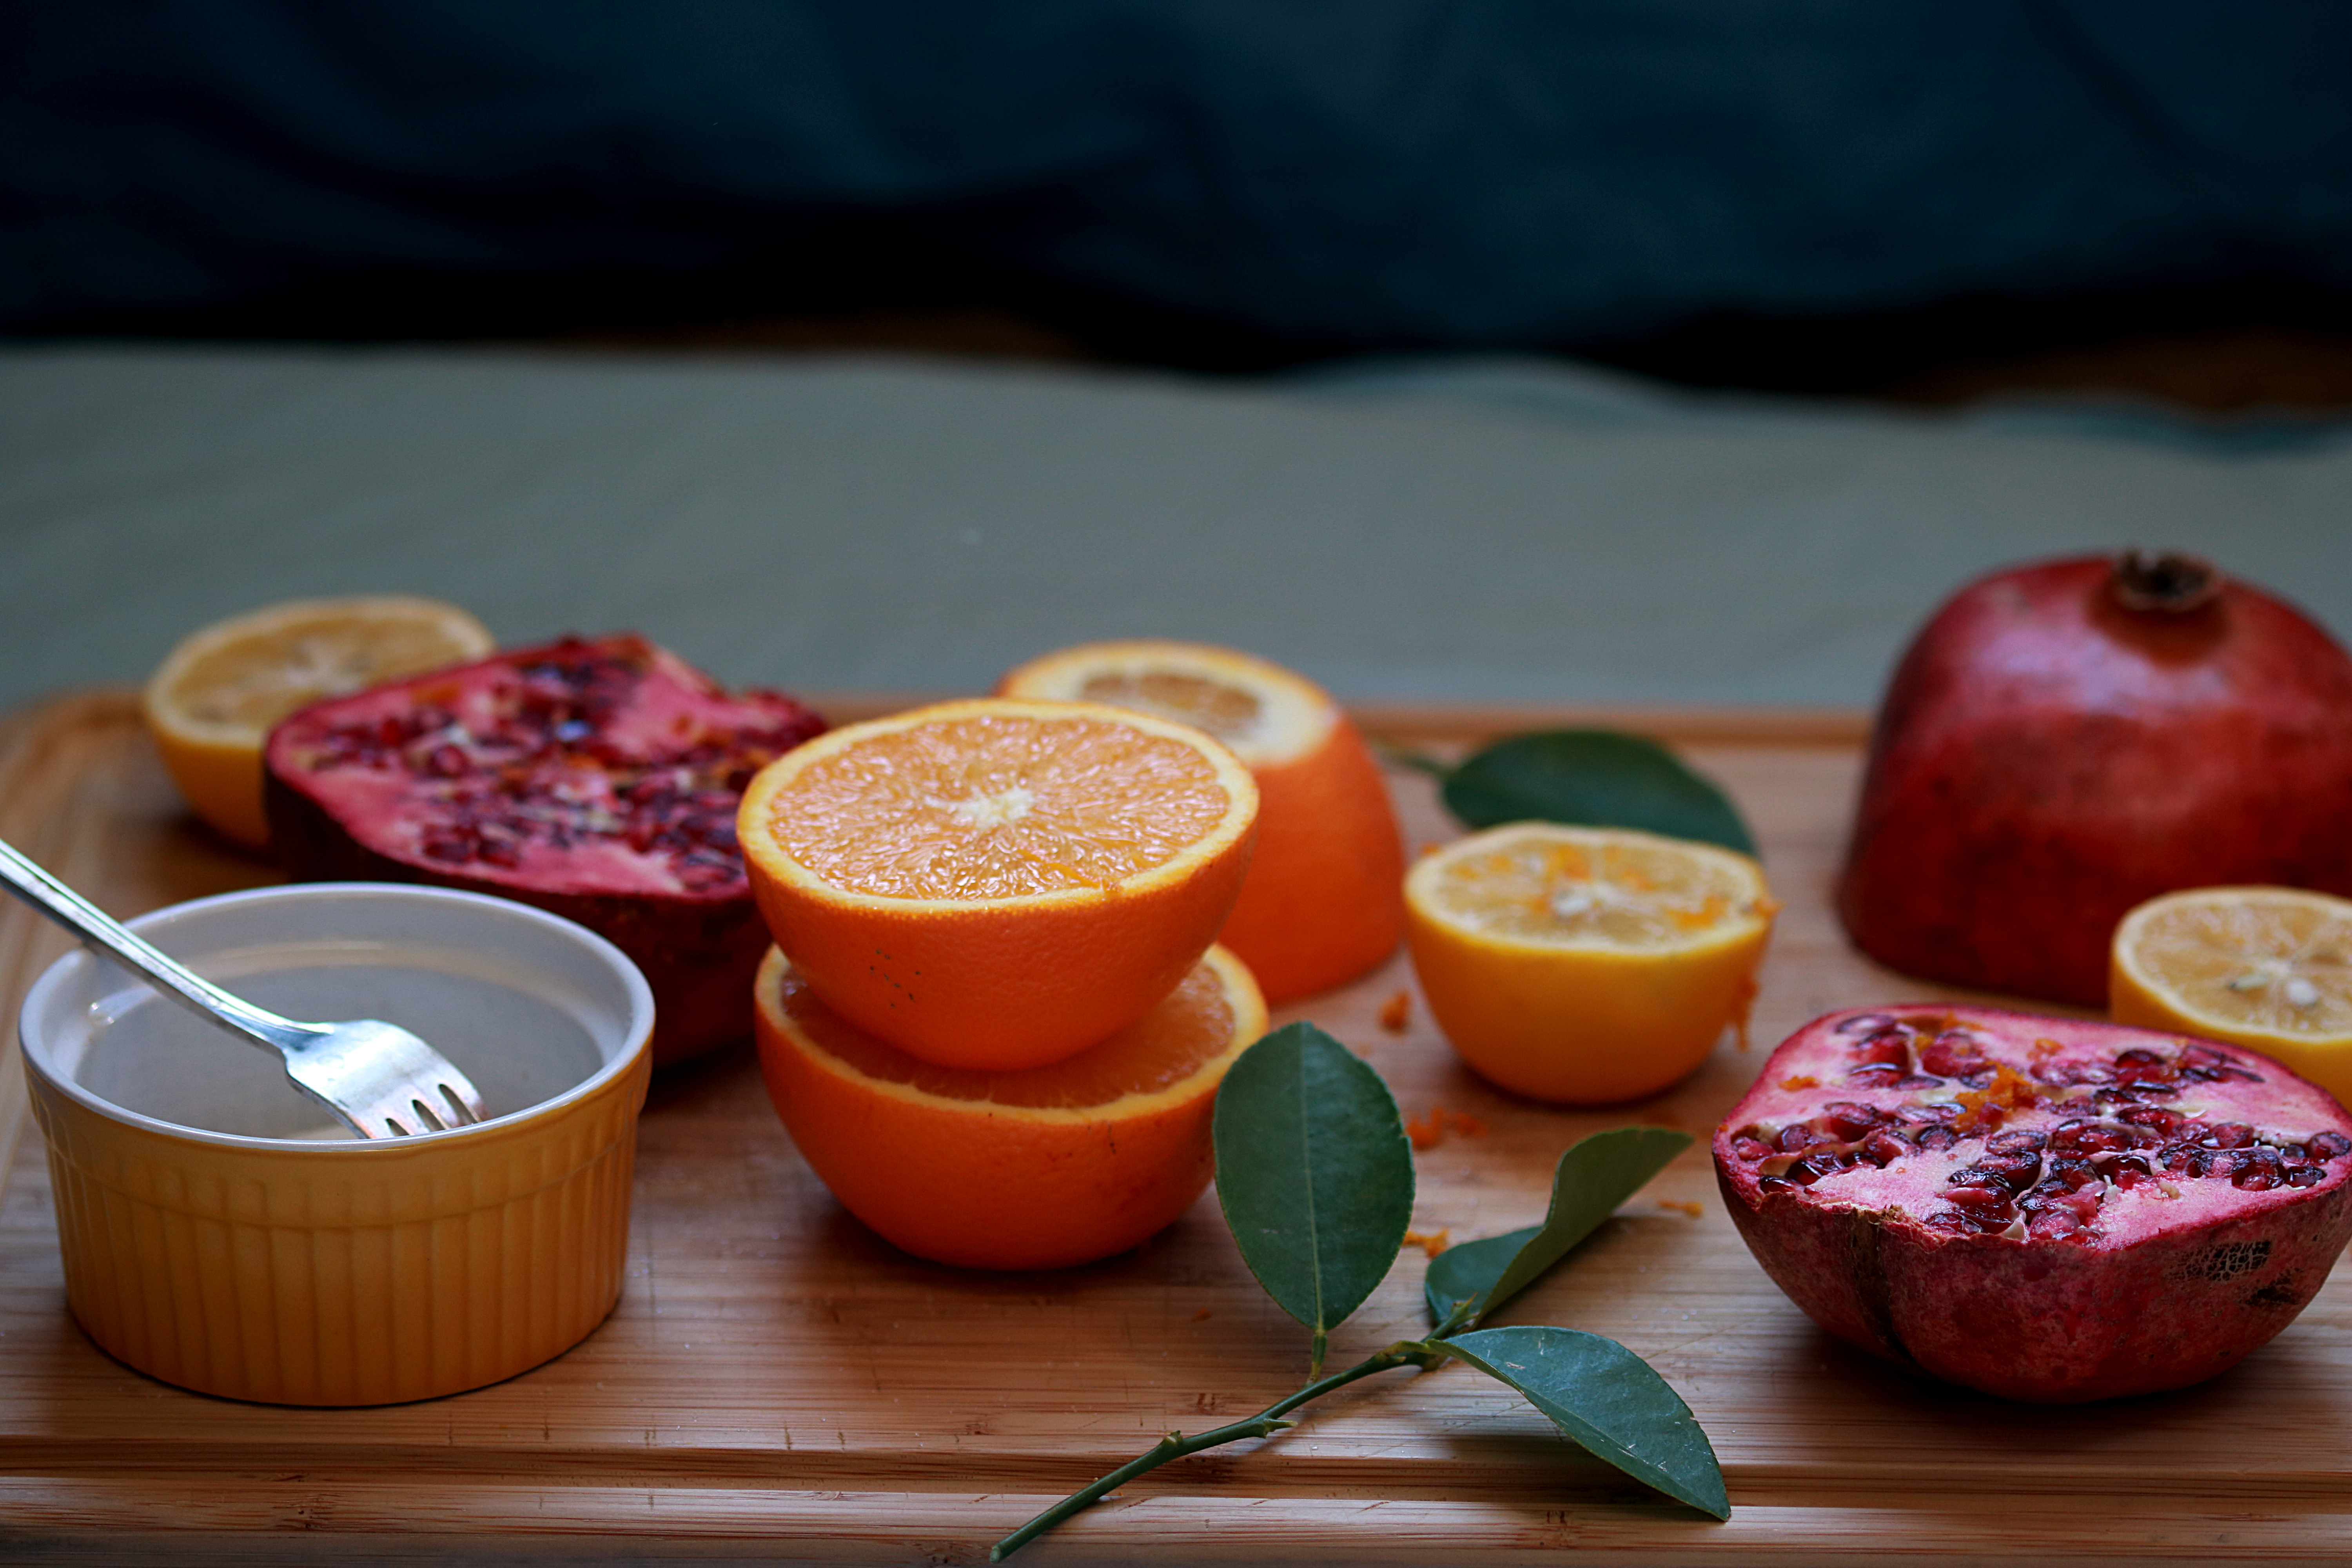 This antioxidant and vitamin C rich platter of pomegranates and citrus all just went into a wonderful Winter citrus salad recipe! It's easy and elegant and will be sure to impress even the pickiest of eaters, just leave out the blue cheese.